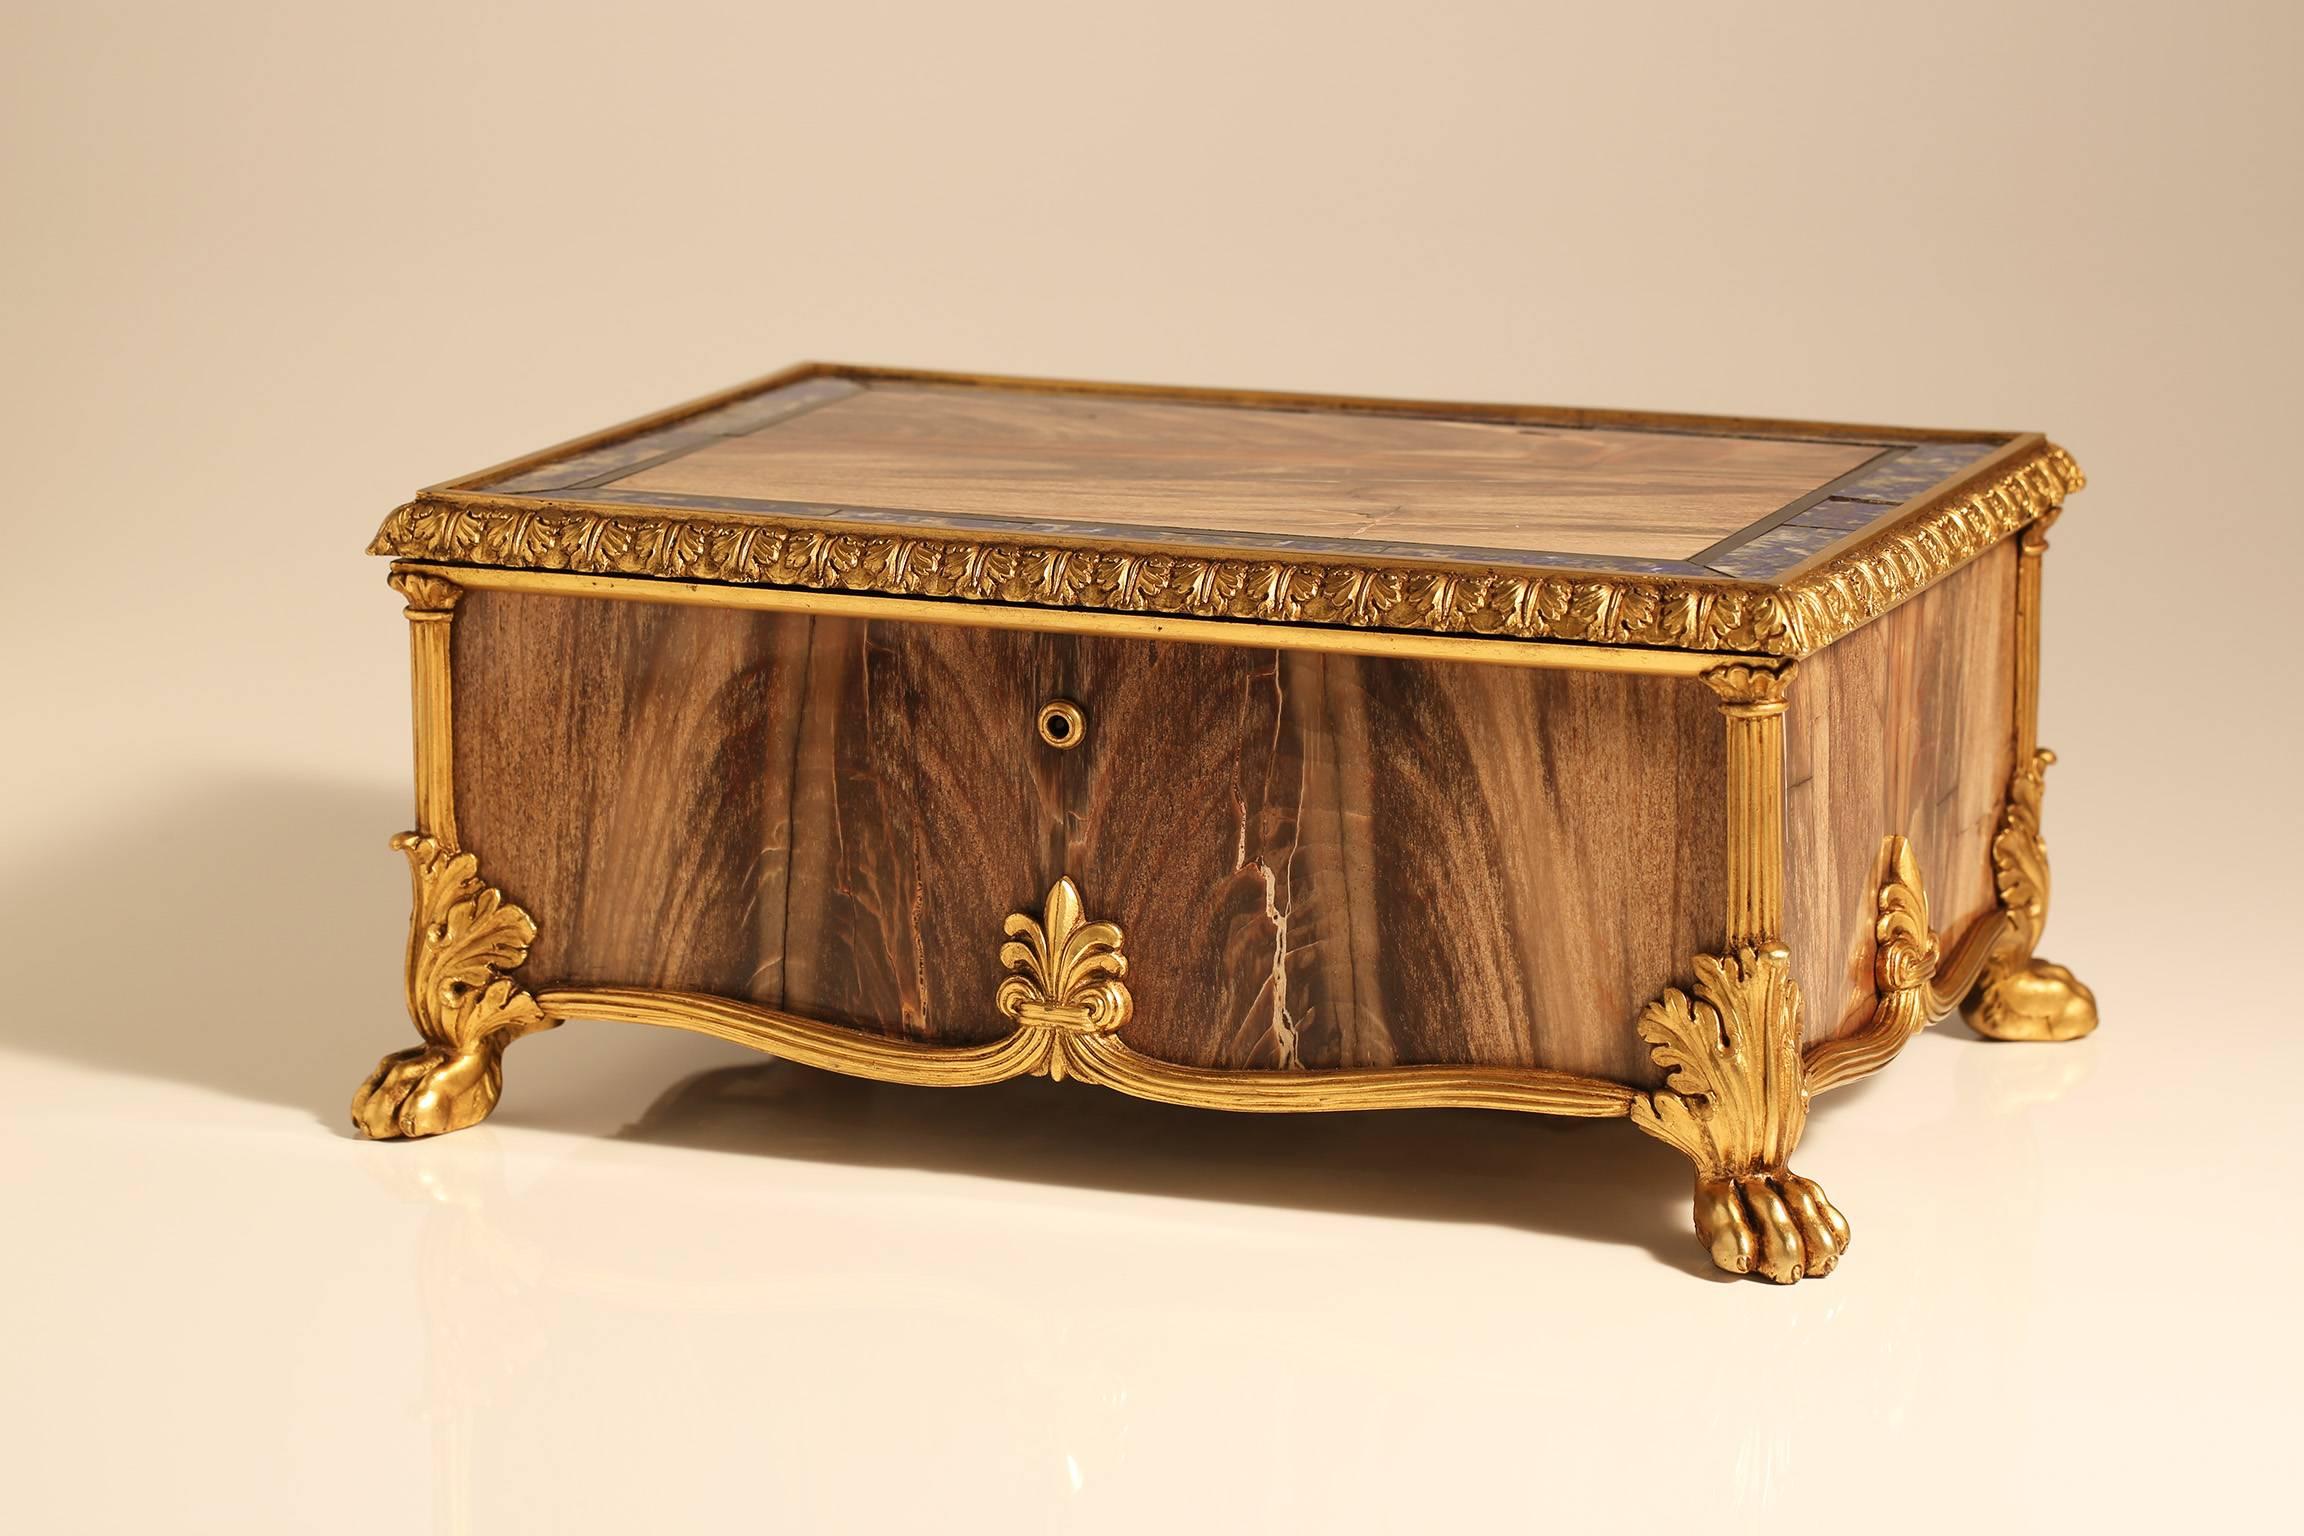 A rare and fine quality early 19th century ormolu, petrified wood and hard stone inlaid casket, probably used as a humidor. Florence, early 19th century. The hinged lifting lid with a large panel of petrified wood bordered by a lapis lazuli and